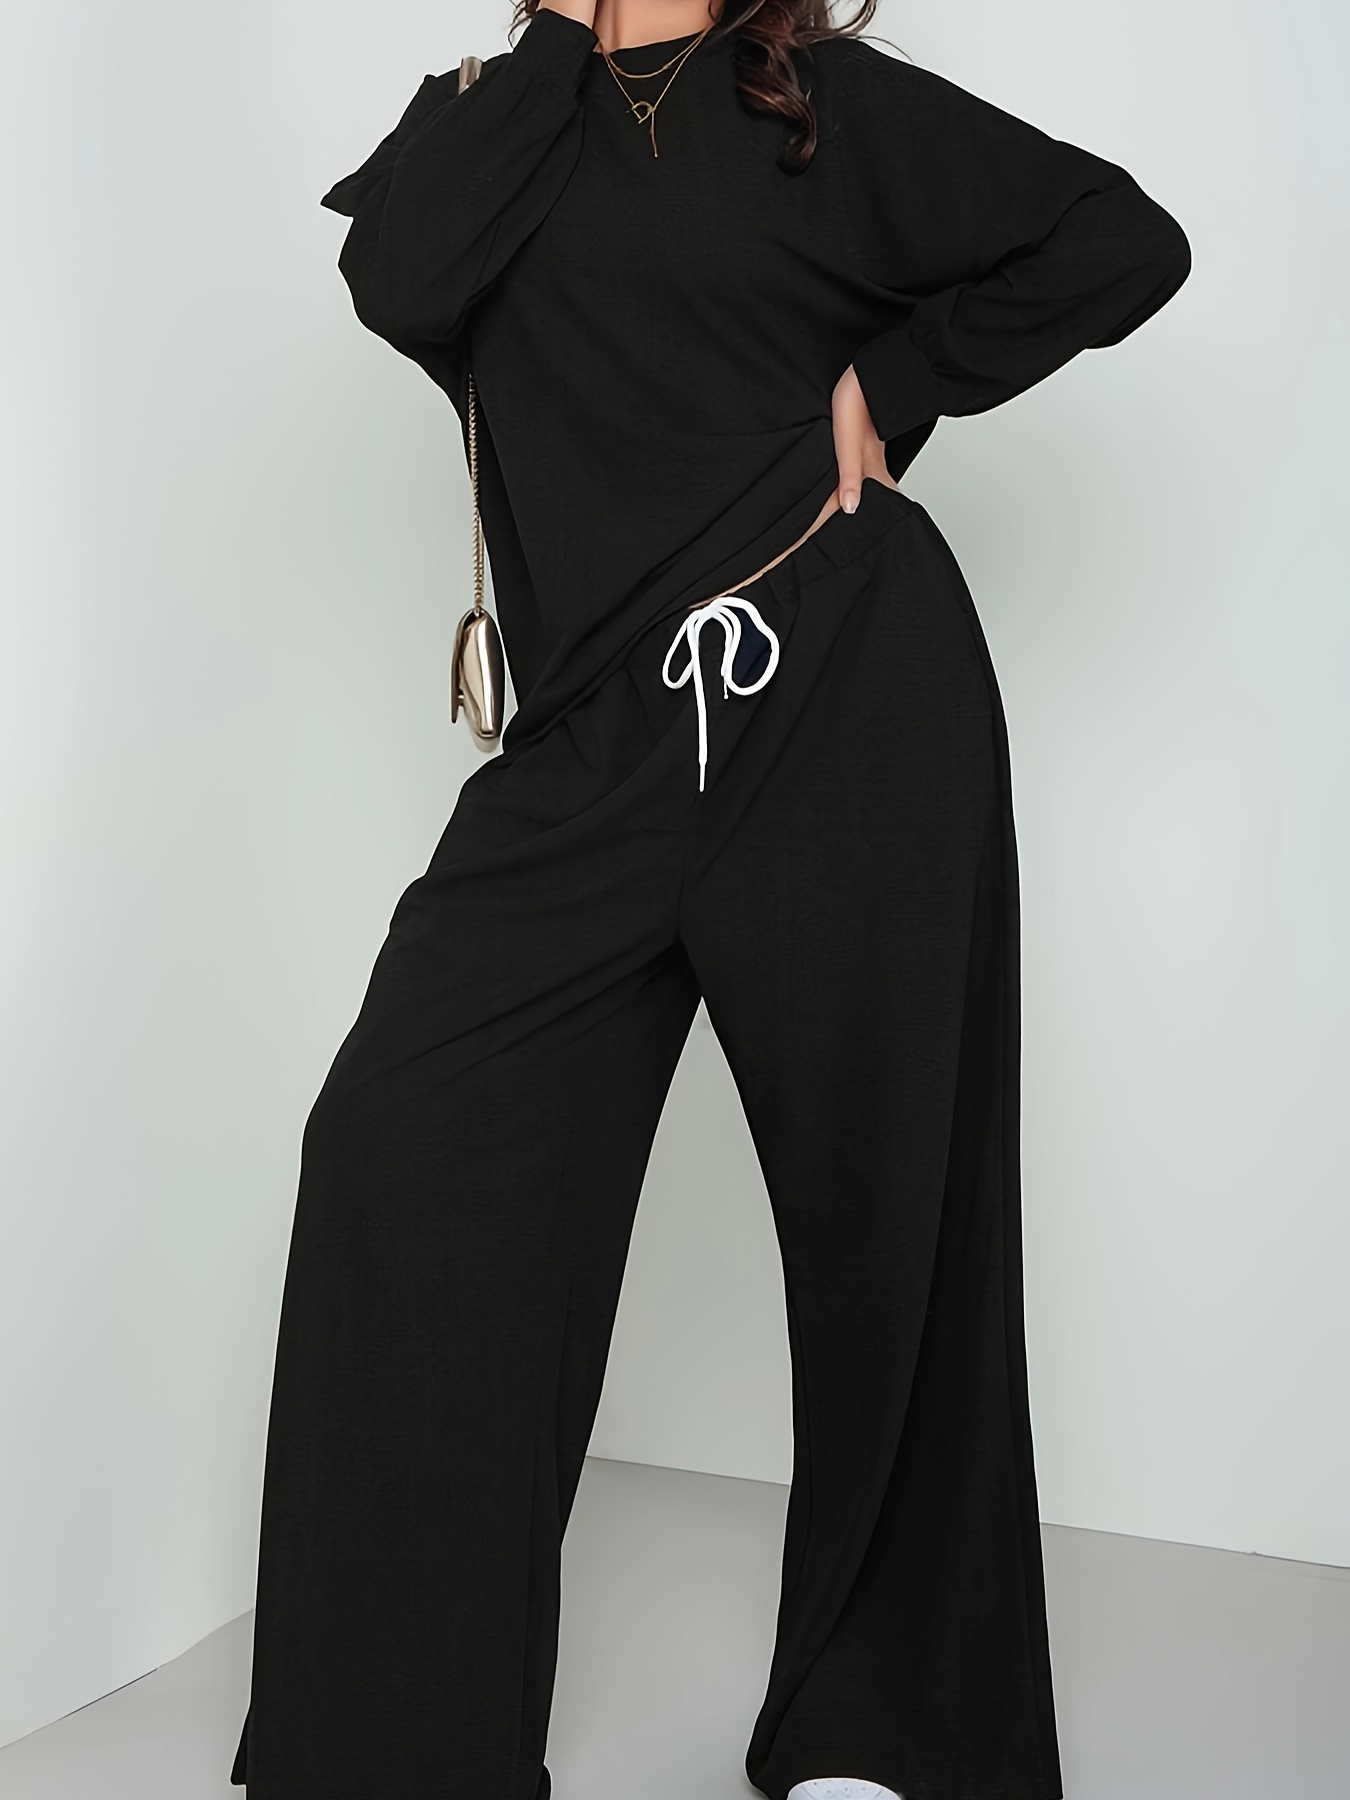 Plus Size Casual Outfits Two Piece Set, Women's Plus Solid Long Sleeve  Round Neck Crop Top & Wide Leg Pants Outfits 2 Piece Set